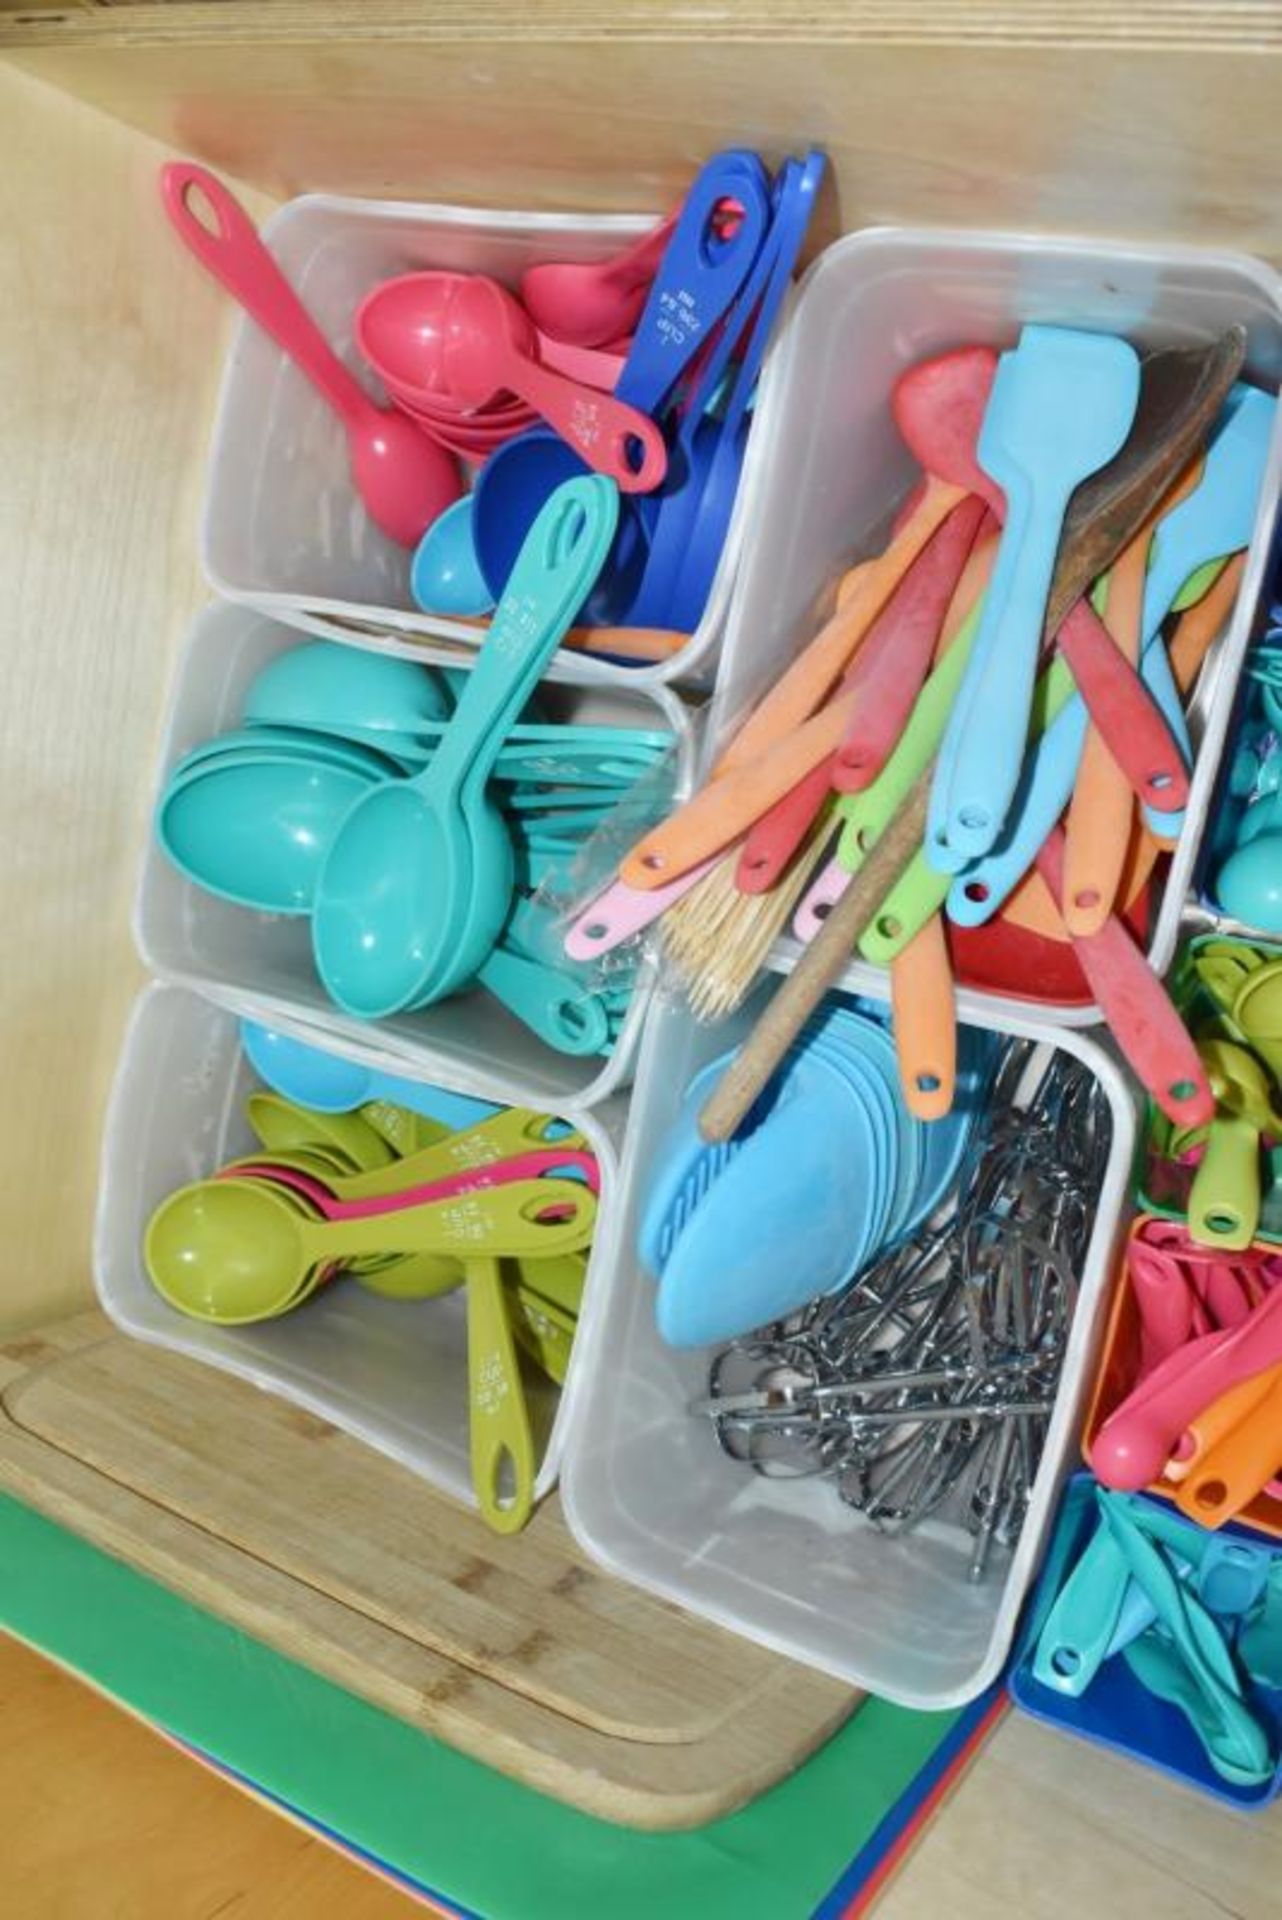 Large Selection of Kitchen Utensils and Baking Accessories - Contents of Four Large Drawers - Includ - Image 4 of 10